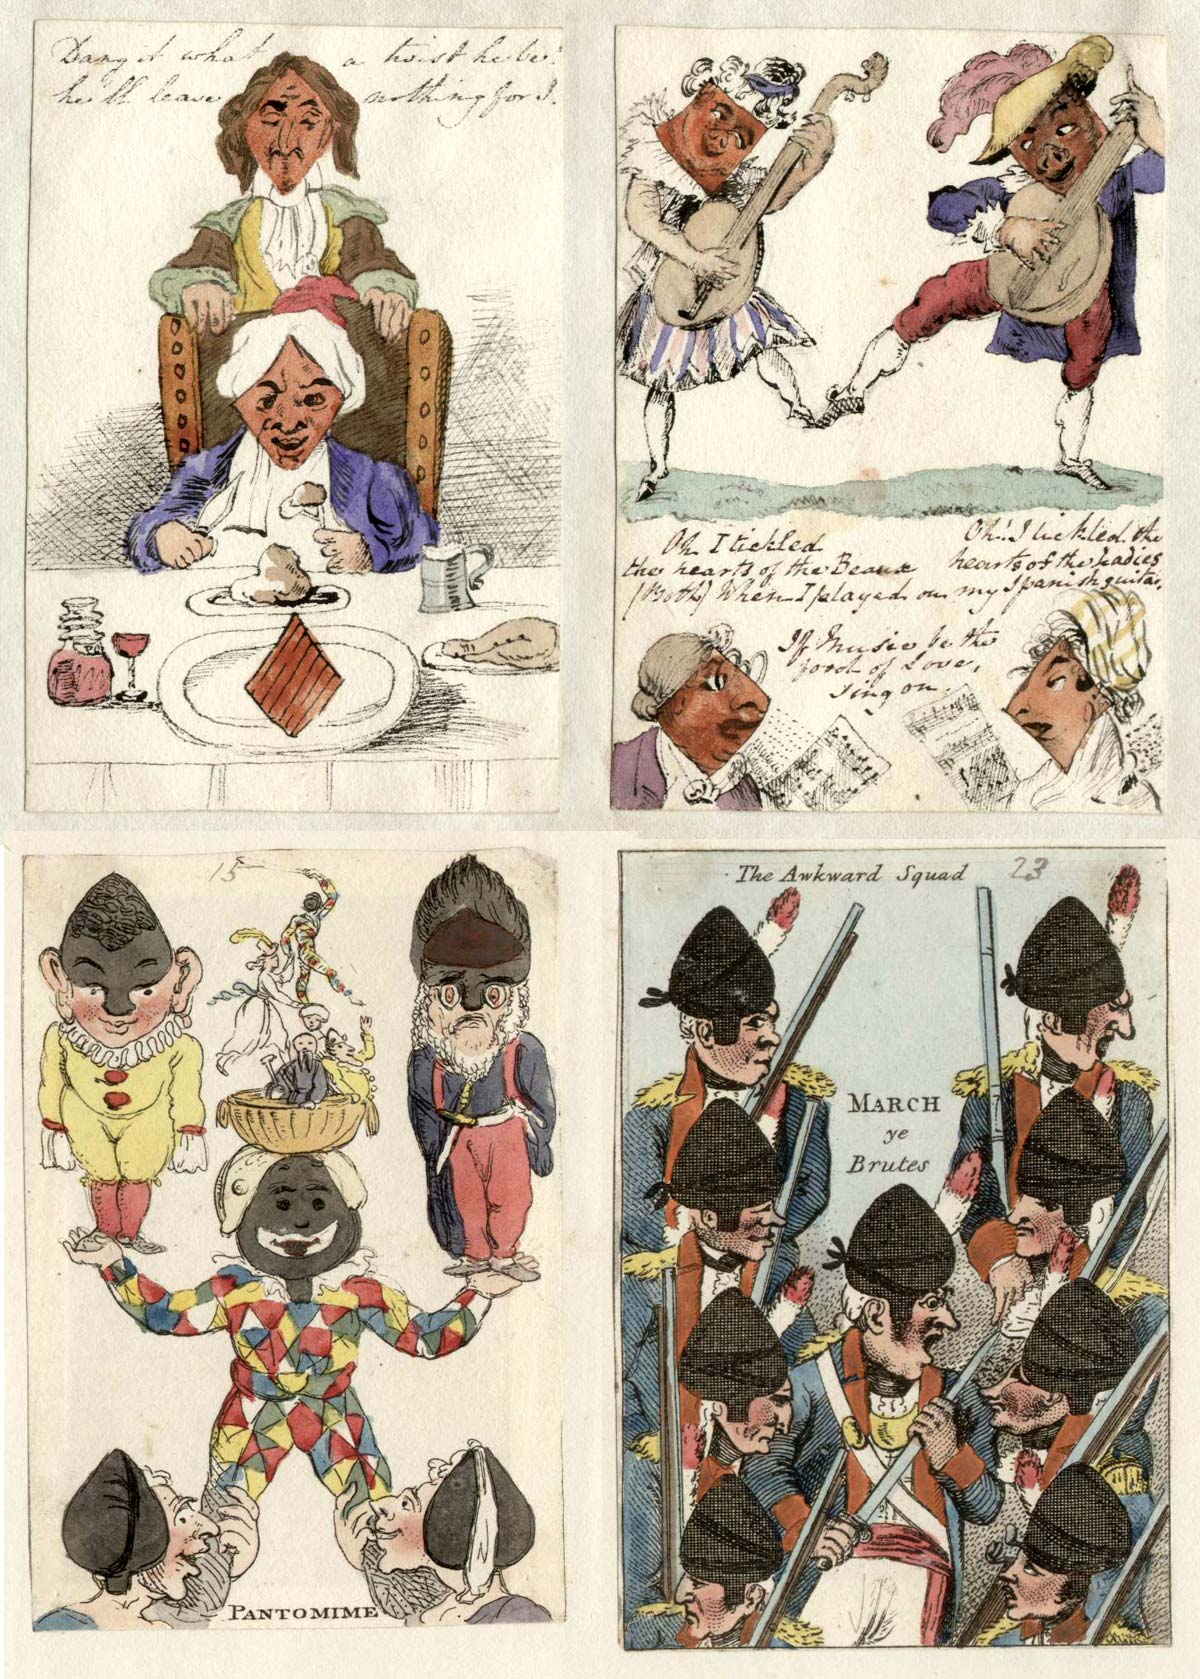 Transformation proofs from the John Nixon Scrapbook covering packs published from 1803 to 1820